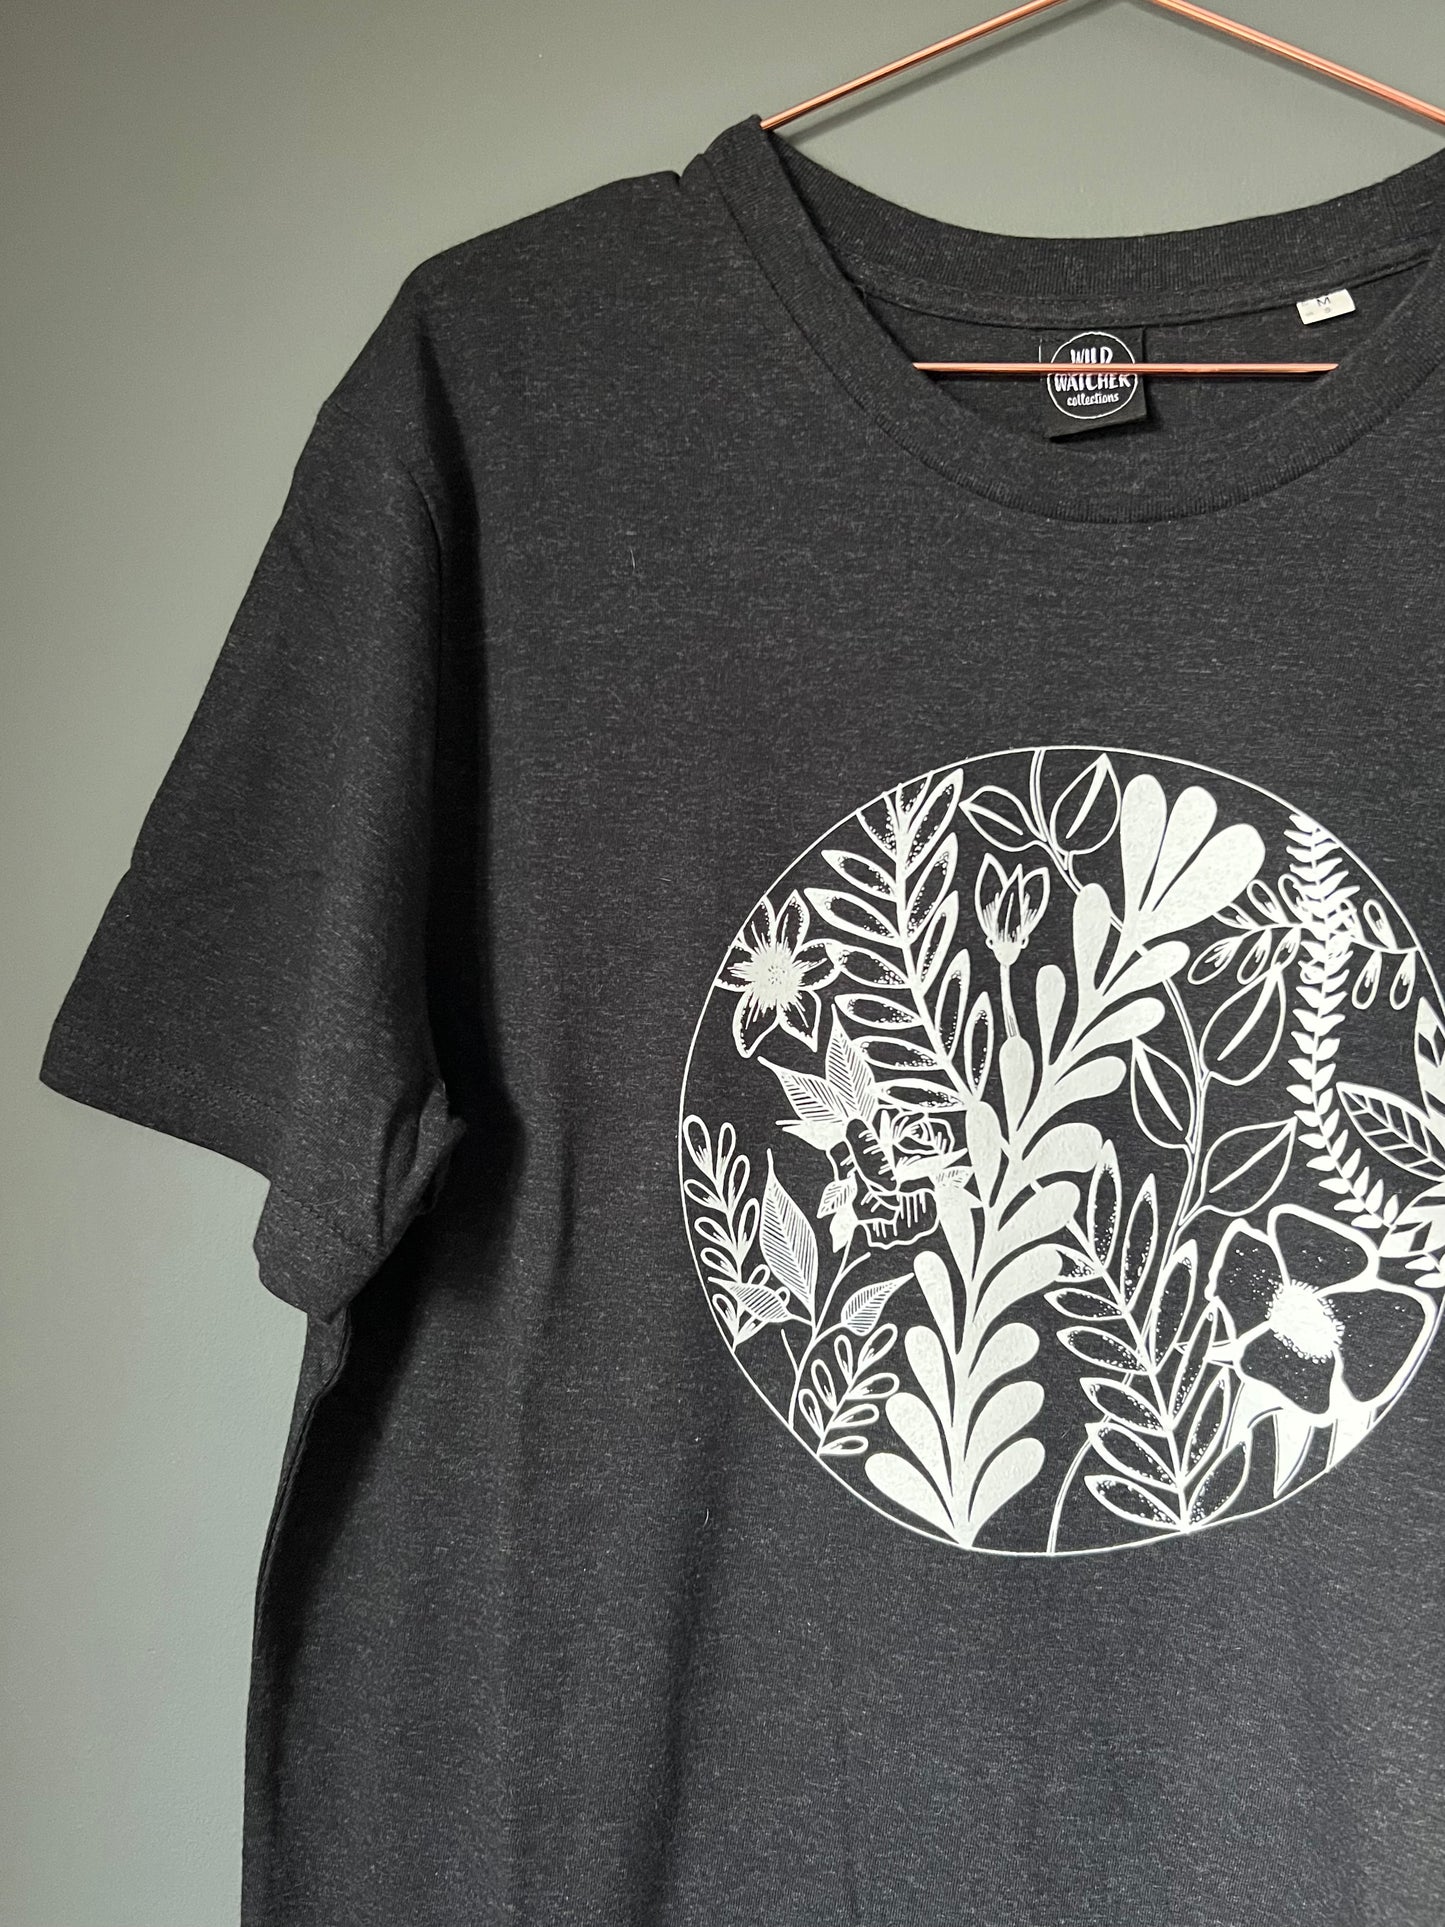 Floral Infinity Organic Unisex Tee's - Includes a free notebook!